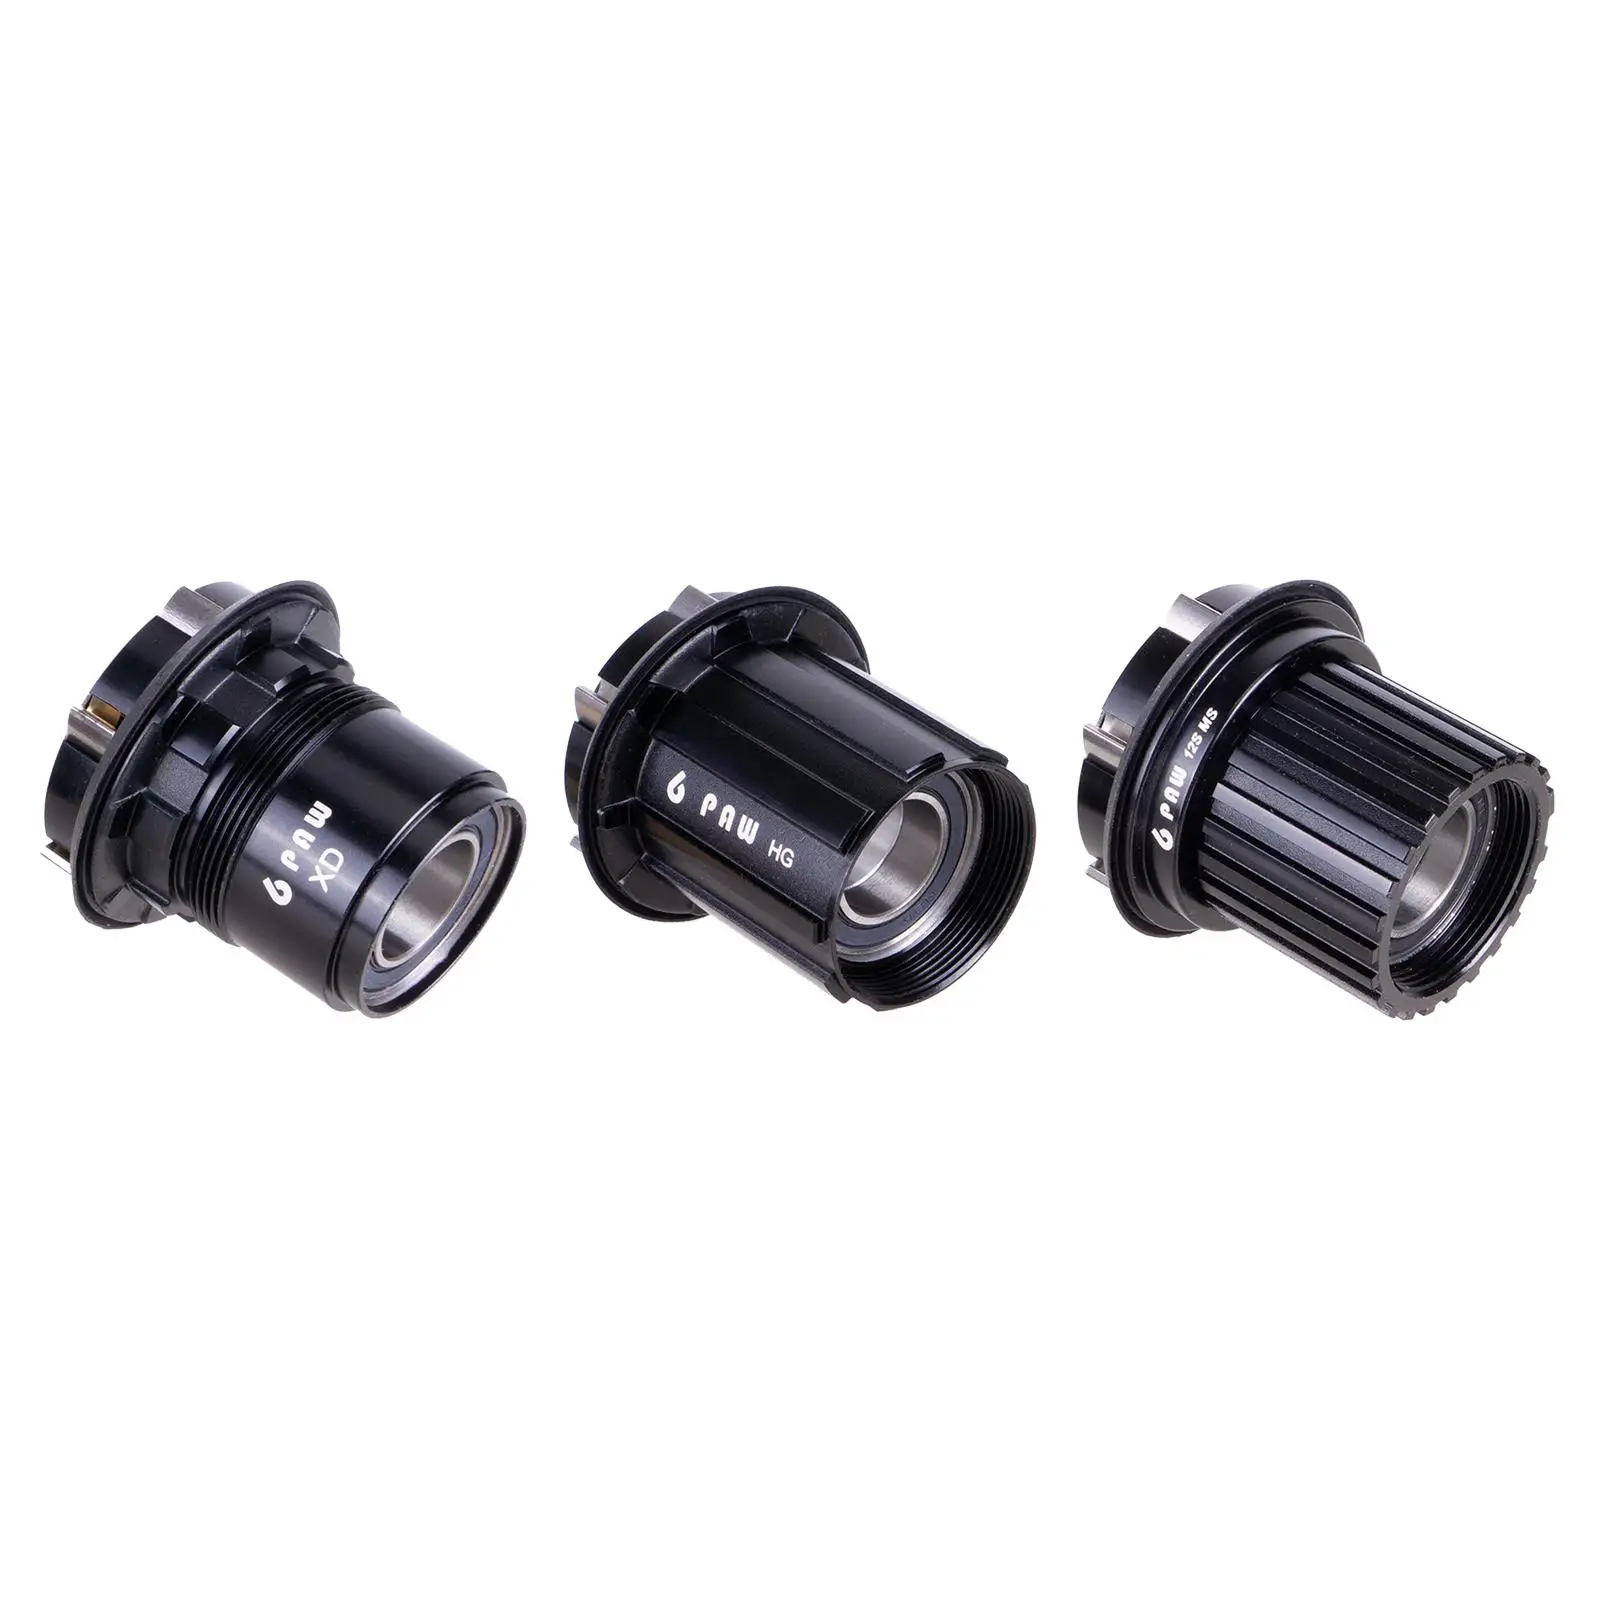 Solid Hub Driver Adapter Bicycle Free Hub Body Carbon Steel Components Parts High Strength MTB Bike Freehub Body for 8-12 Speed